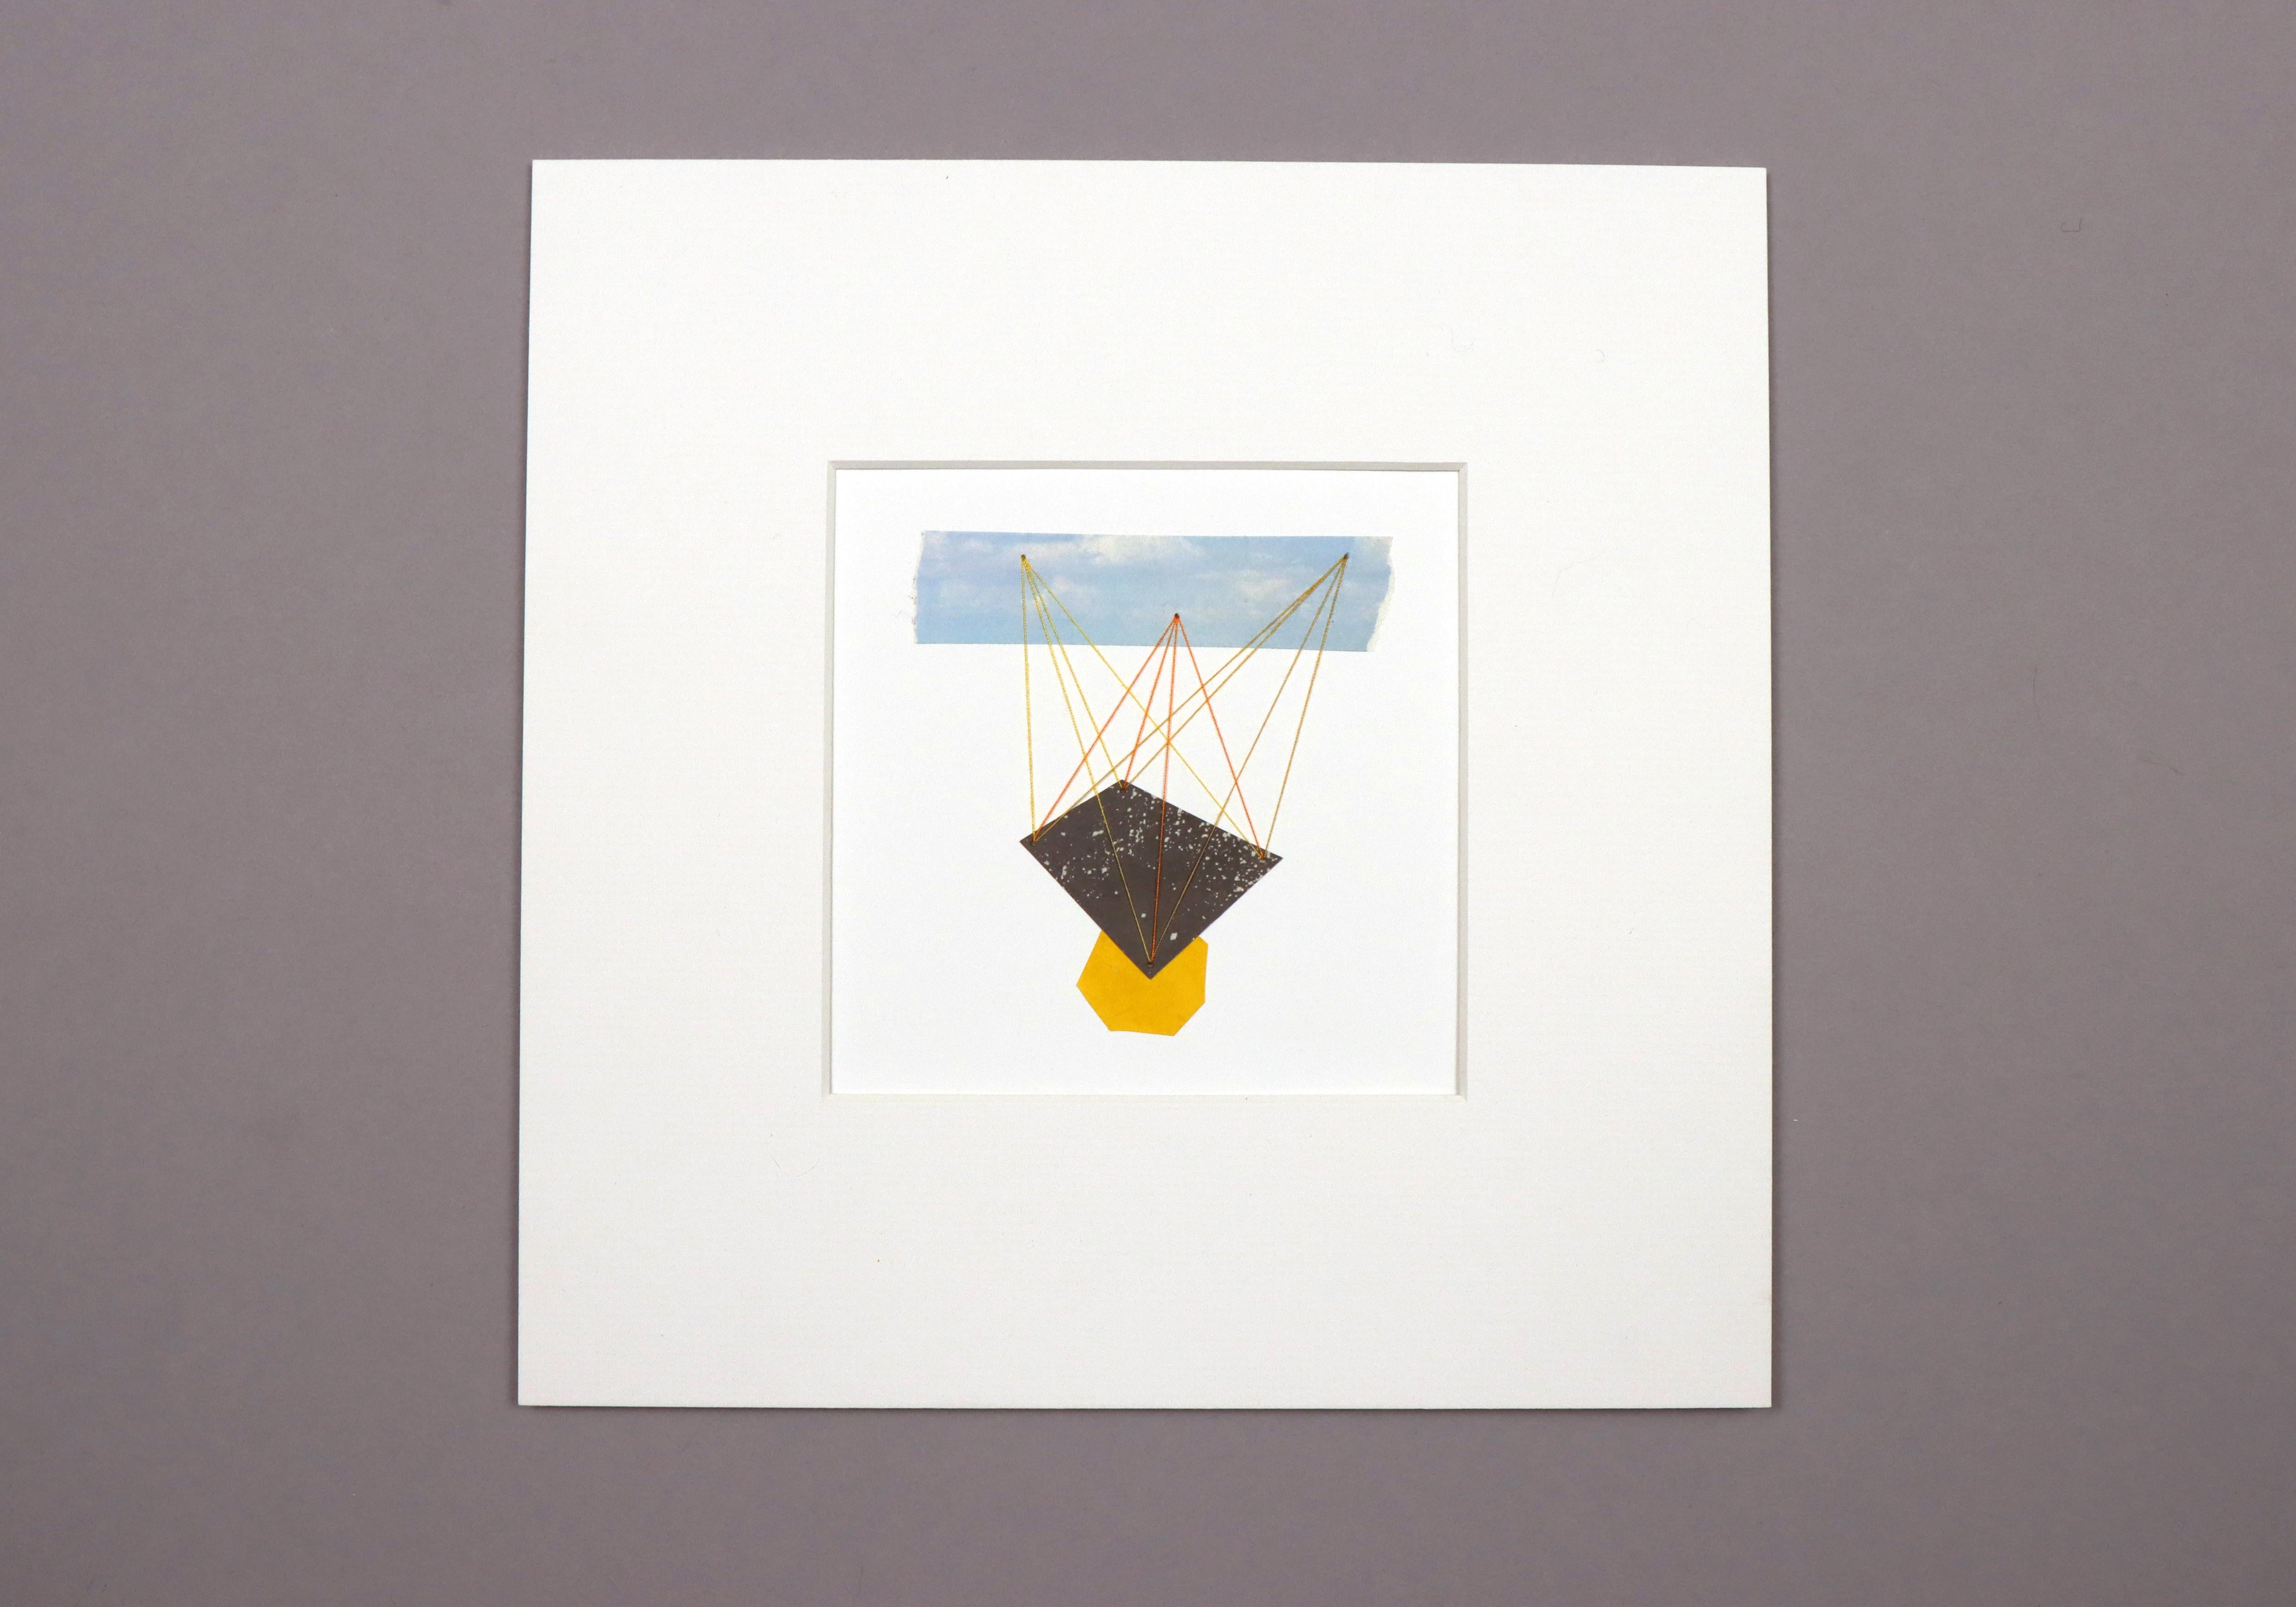 <p>Artist Comments<br /> A minimalistic geometric abstraction, part of artist John Gardner's newest series of mixed media works. He meticulously hand cuts vintage paper, something that has become a defining characteristic of his repertoire. The work